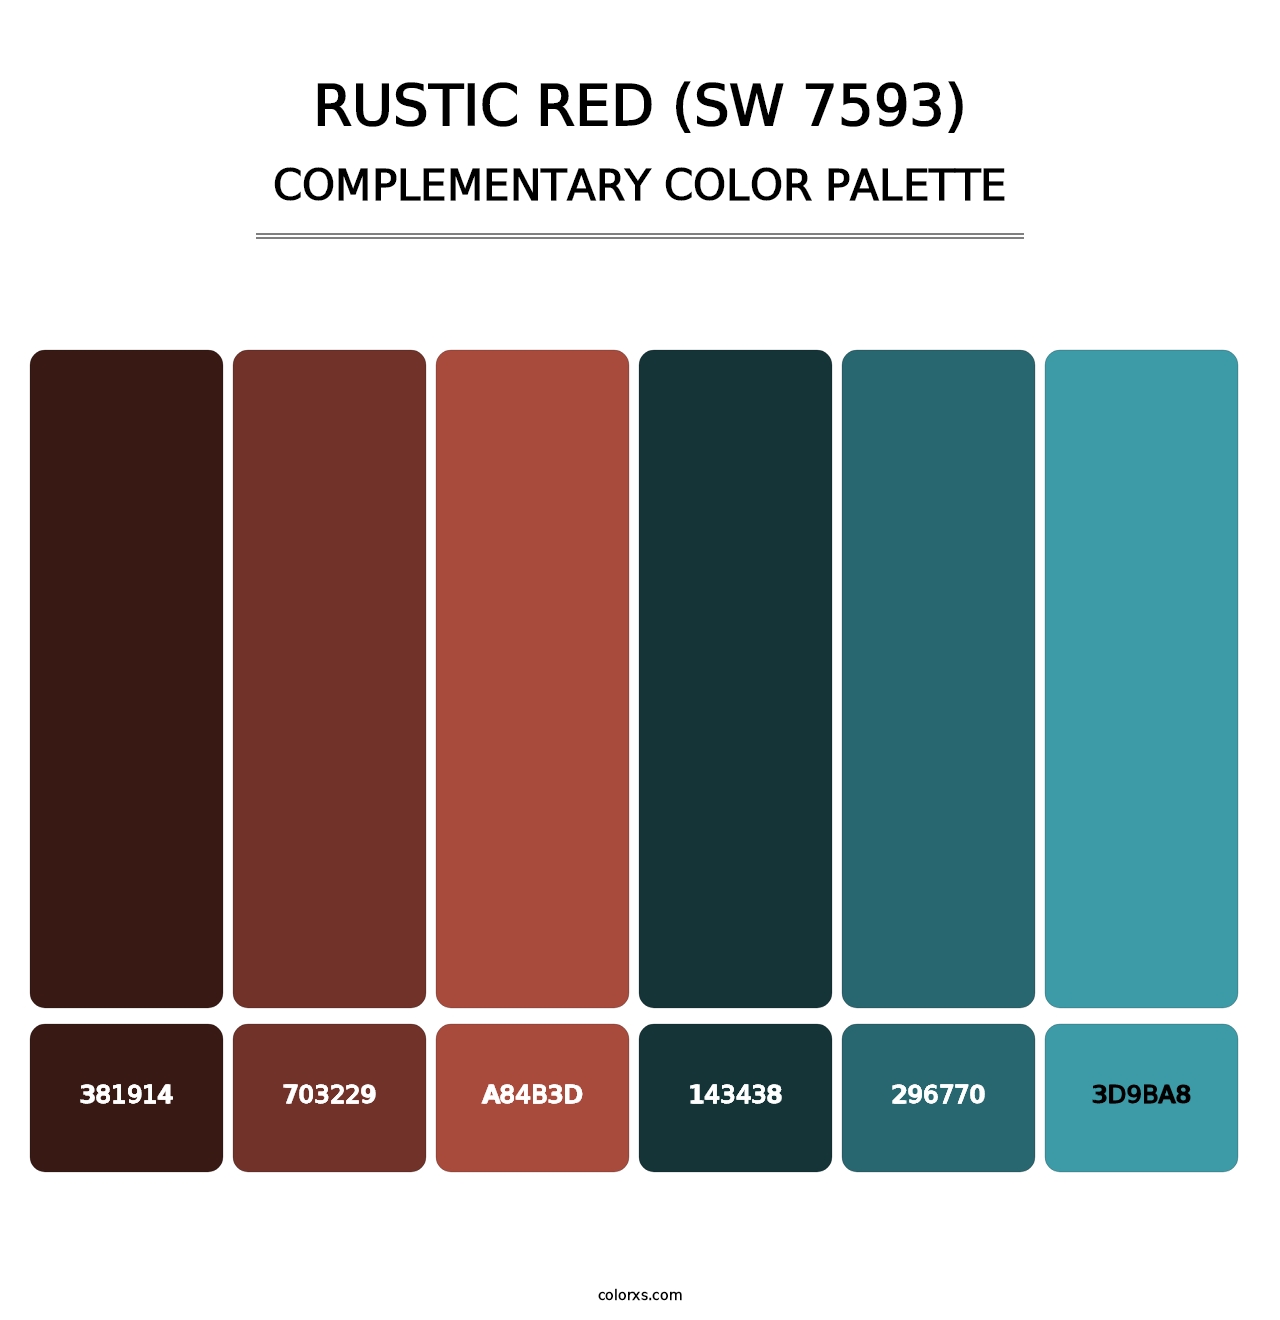 Rustic Red (SW 7593) - Complementary Color Palette